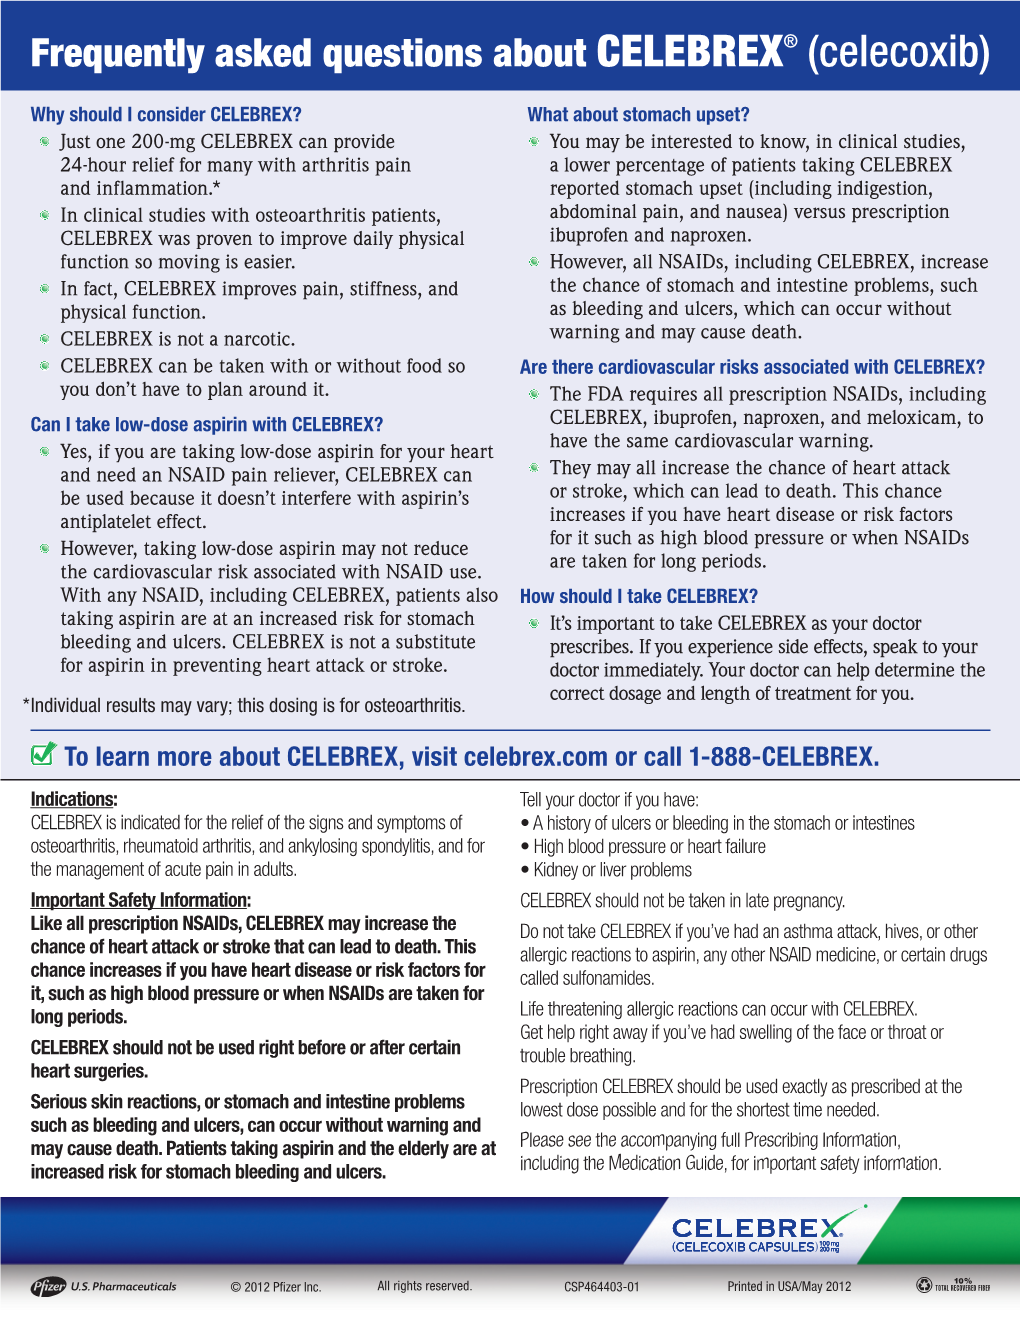 Frequently Asked Questions About CELEBREX® (Celecoxib)